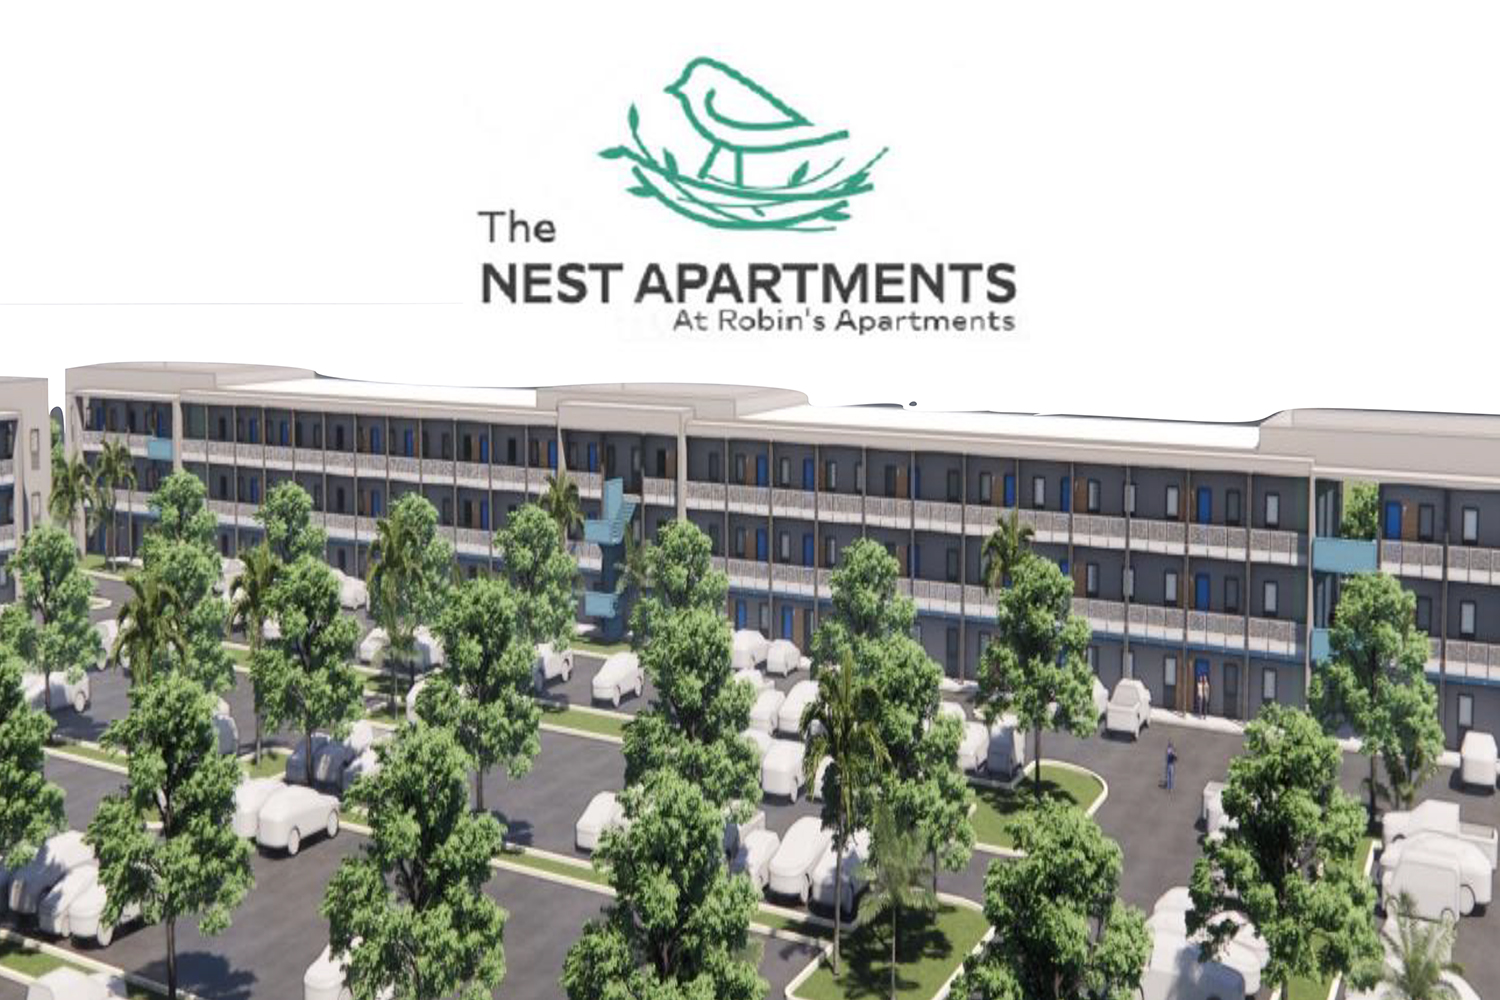 The Nest Apartments